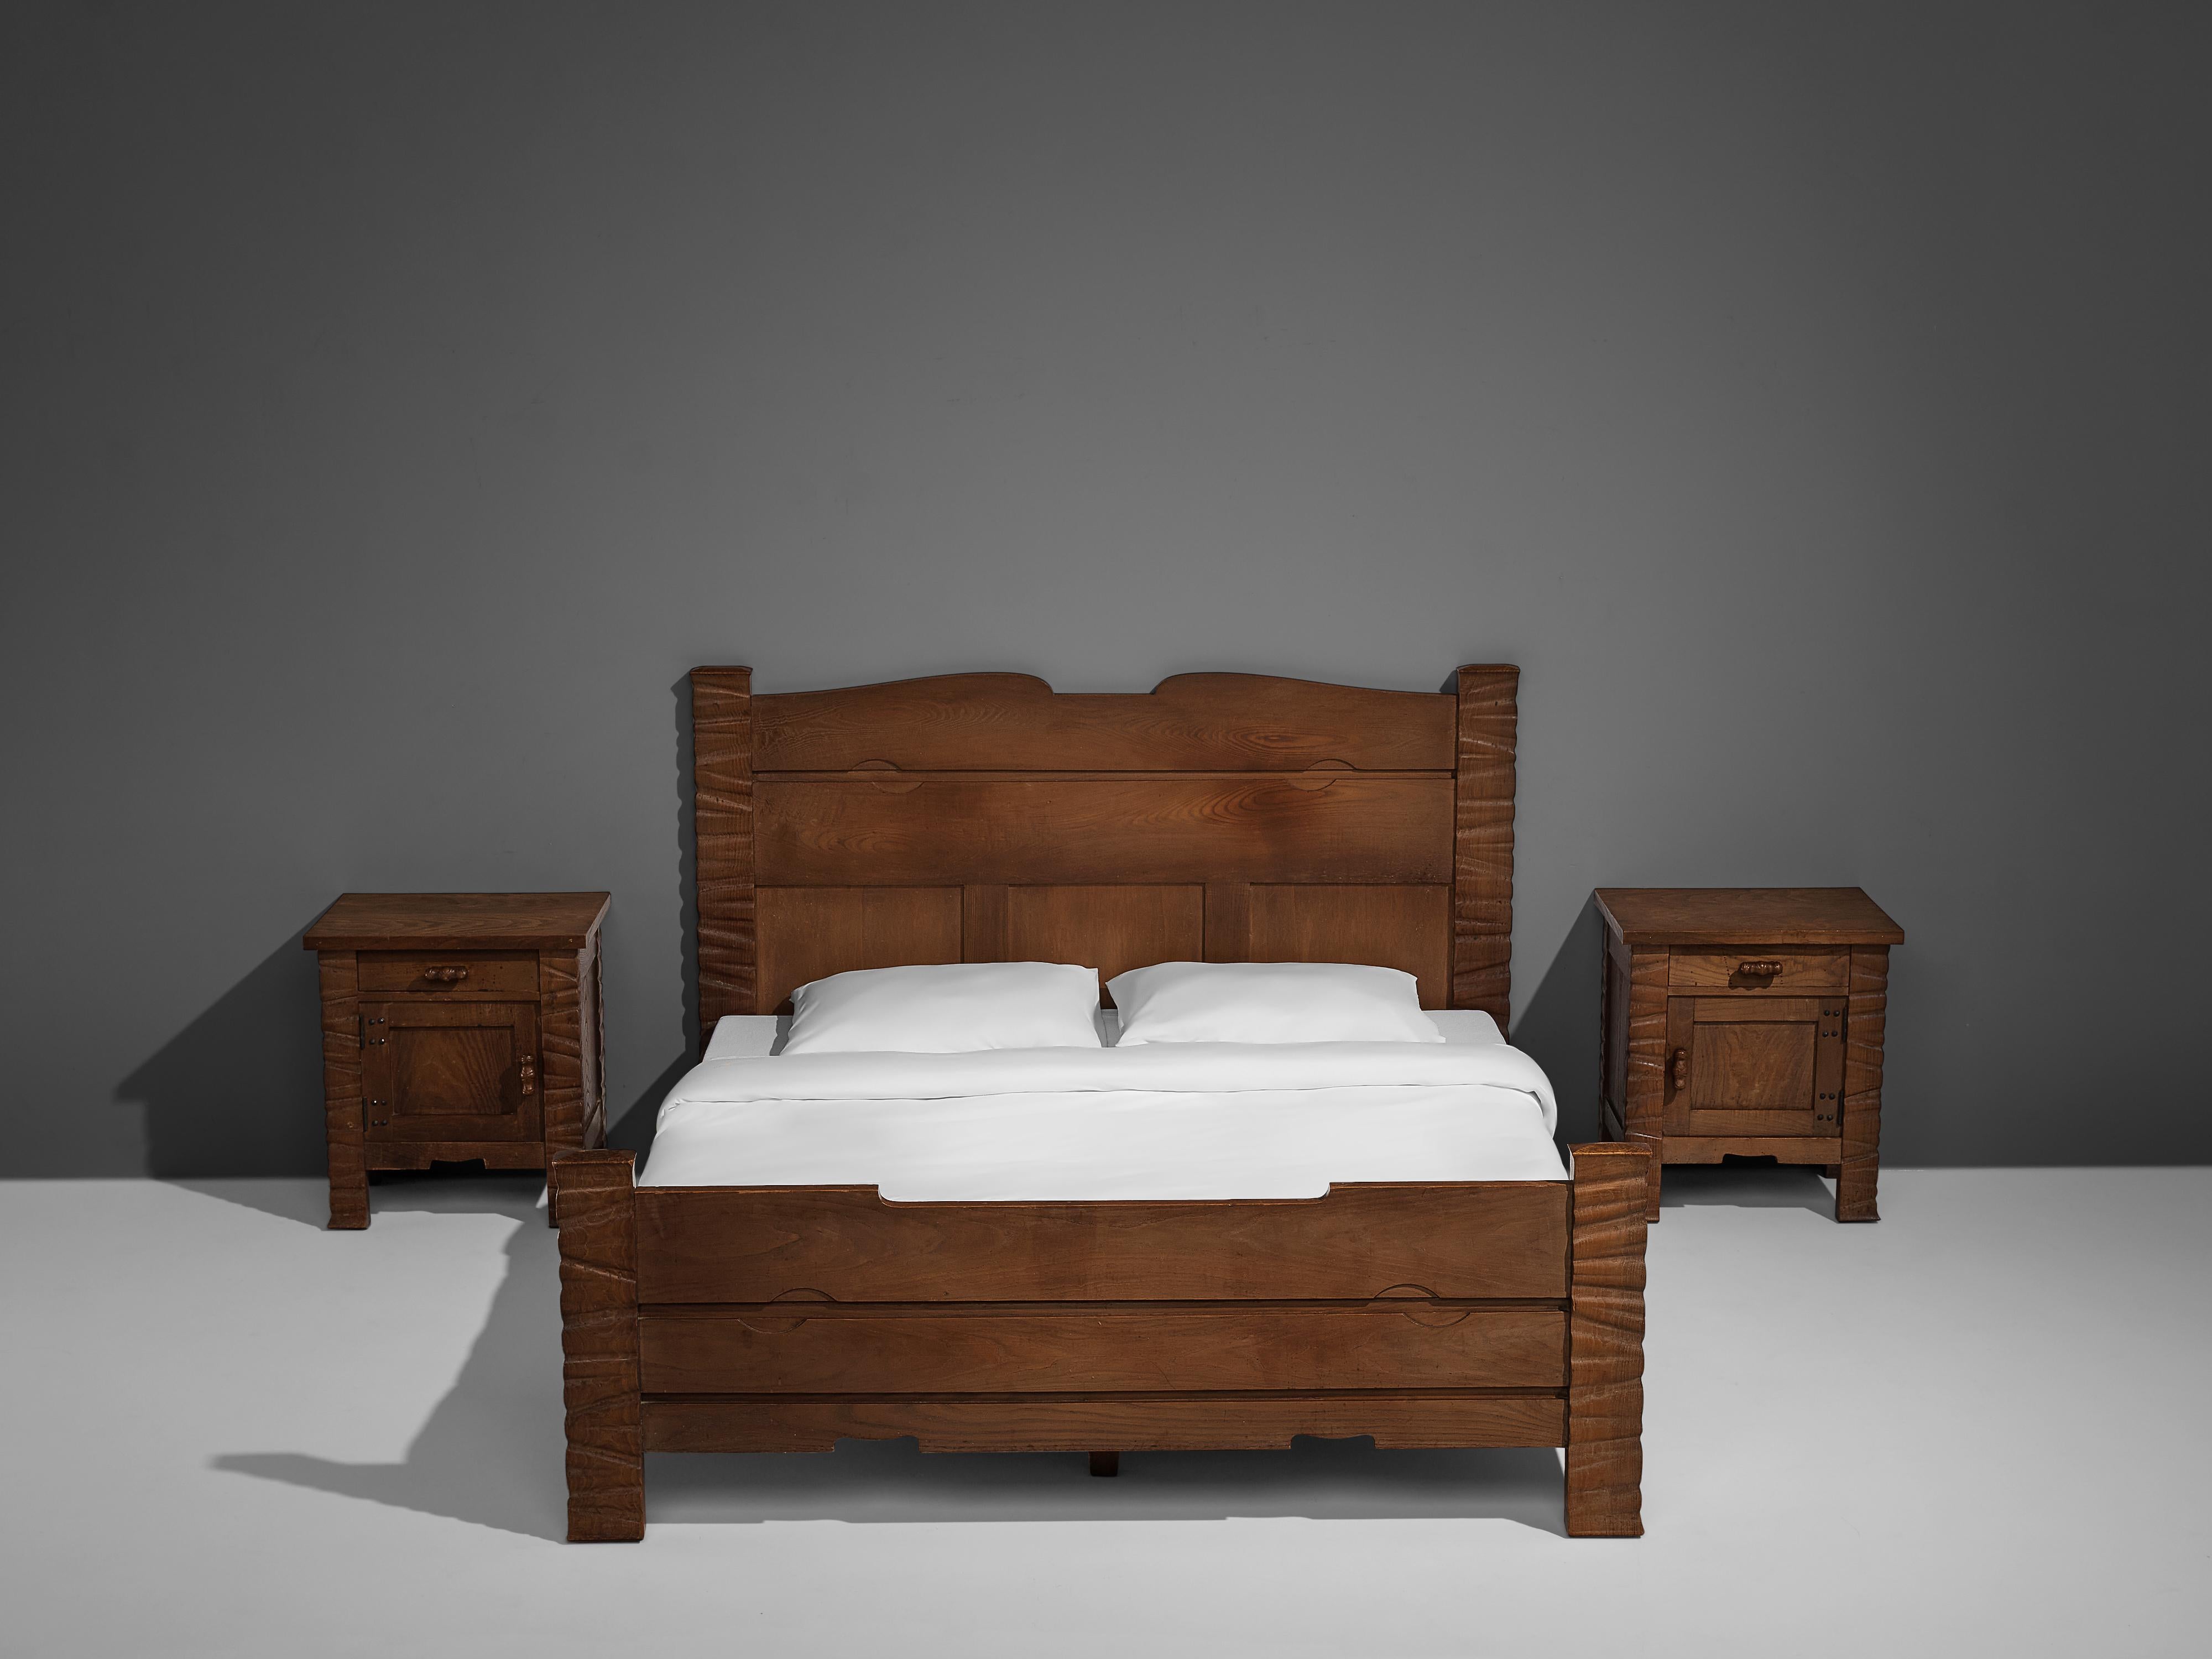 Ernesto Valabrega, bed with nightstands, oak, Italy, circa 1935

Sculptural bed, designed by Ernesto Valabrega for his company Mobilart, circa 1935. This bed shows all characteristics of a true Ernesto Valabrega design. The headboard as well as the